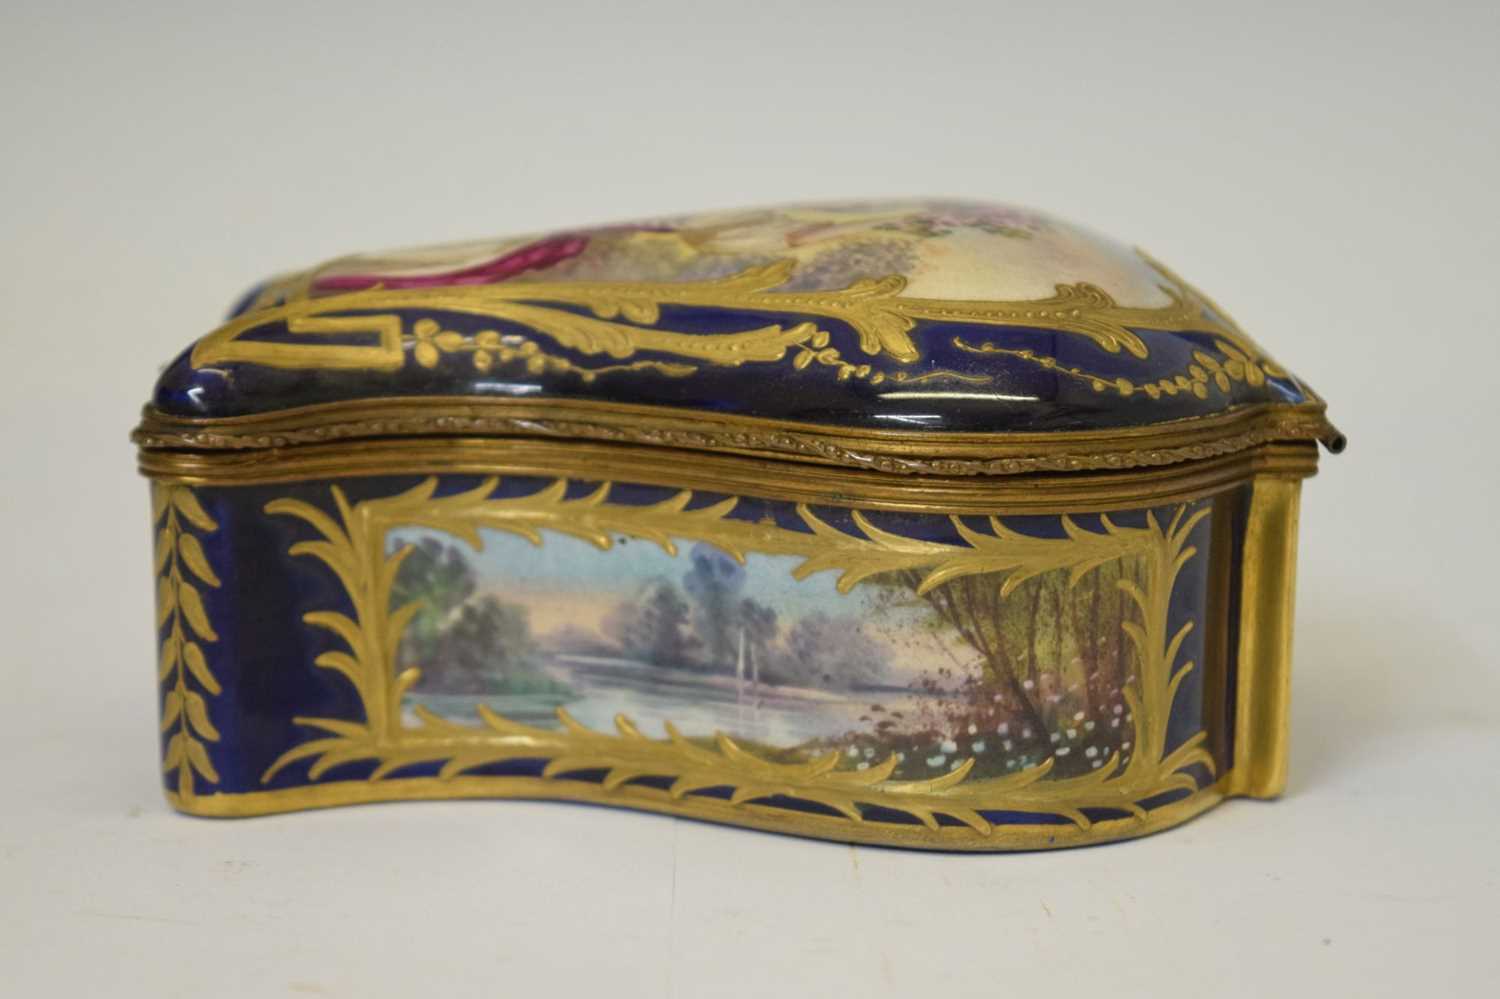 18th century-style porcelain and gilt metal box - Image 5 of 8